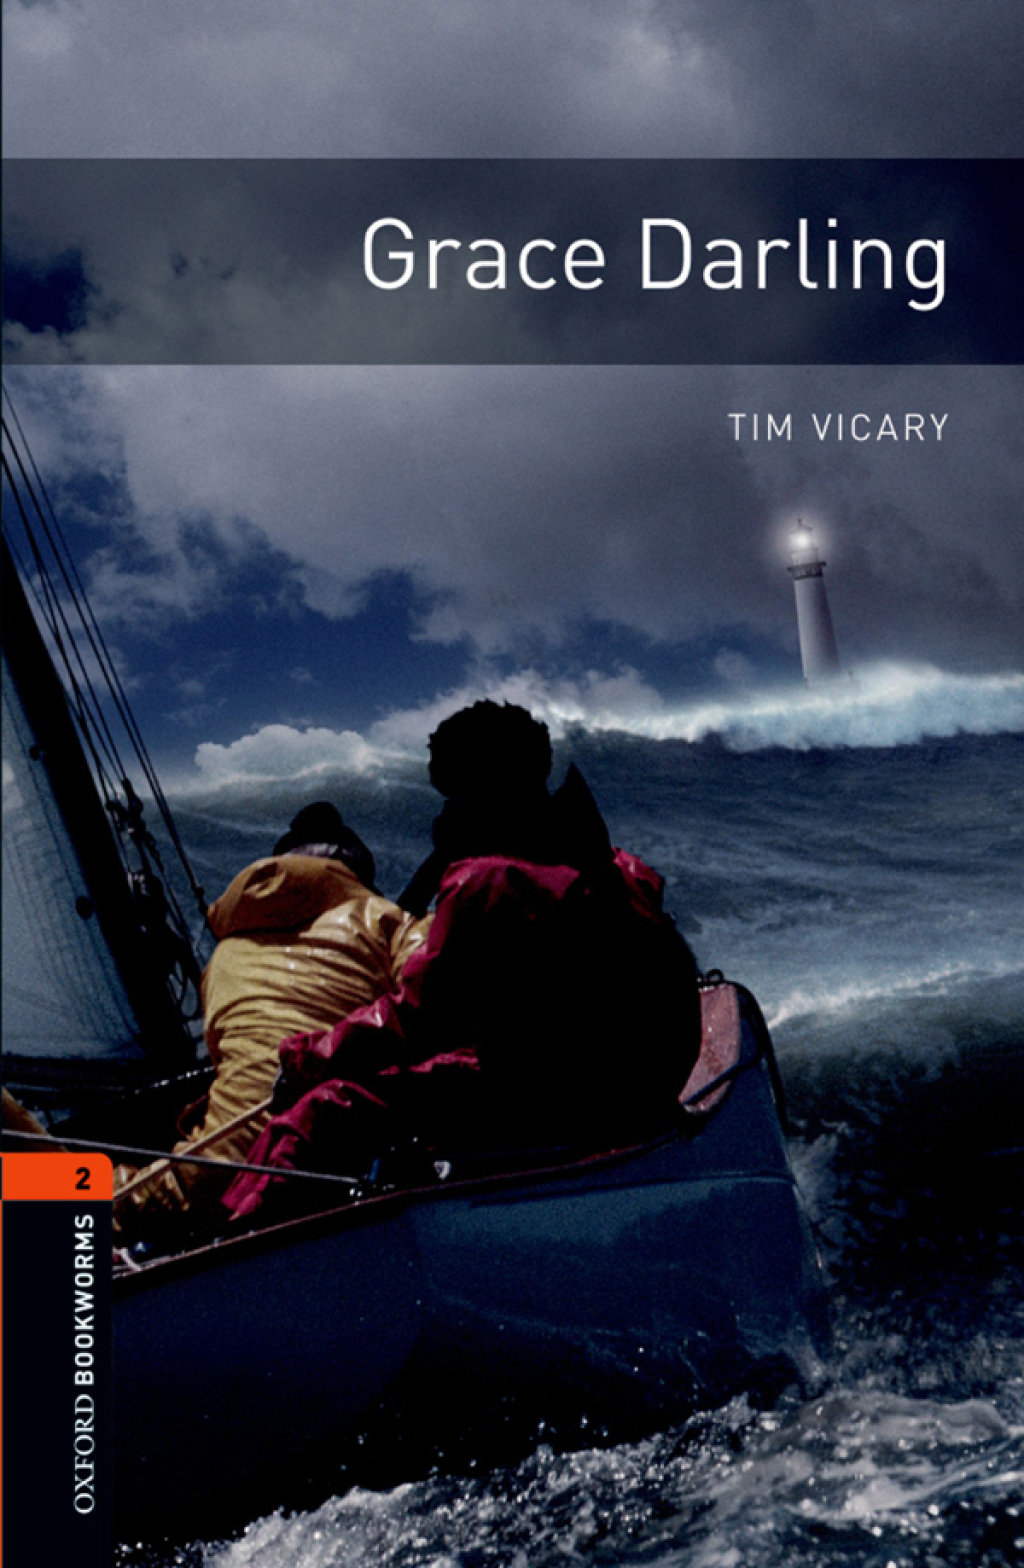 Grace Darling Level 2 Oxford Bookworms Library - 3rd Edition (eBook Rental)